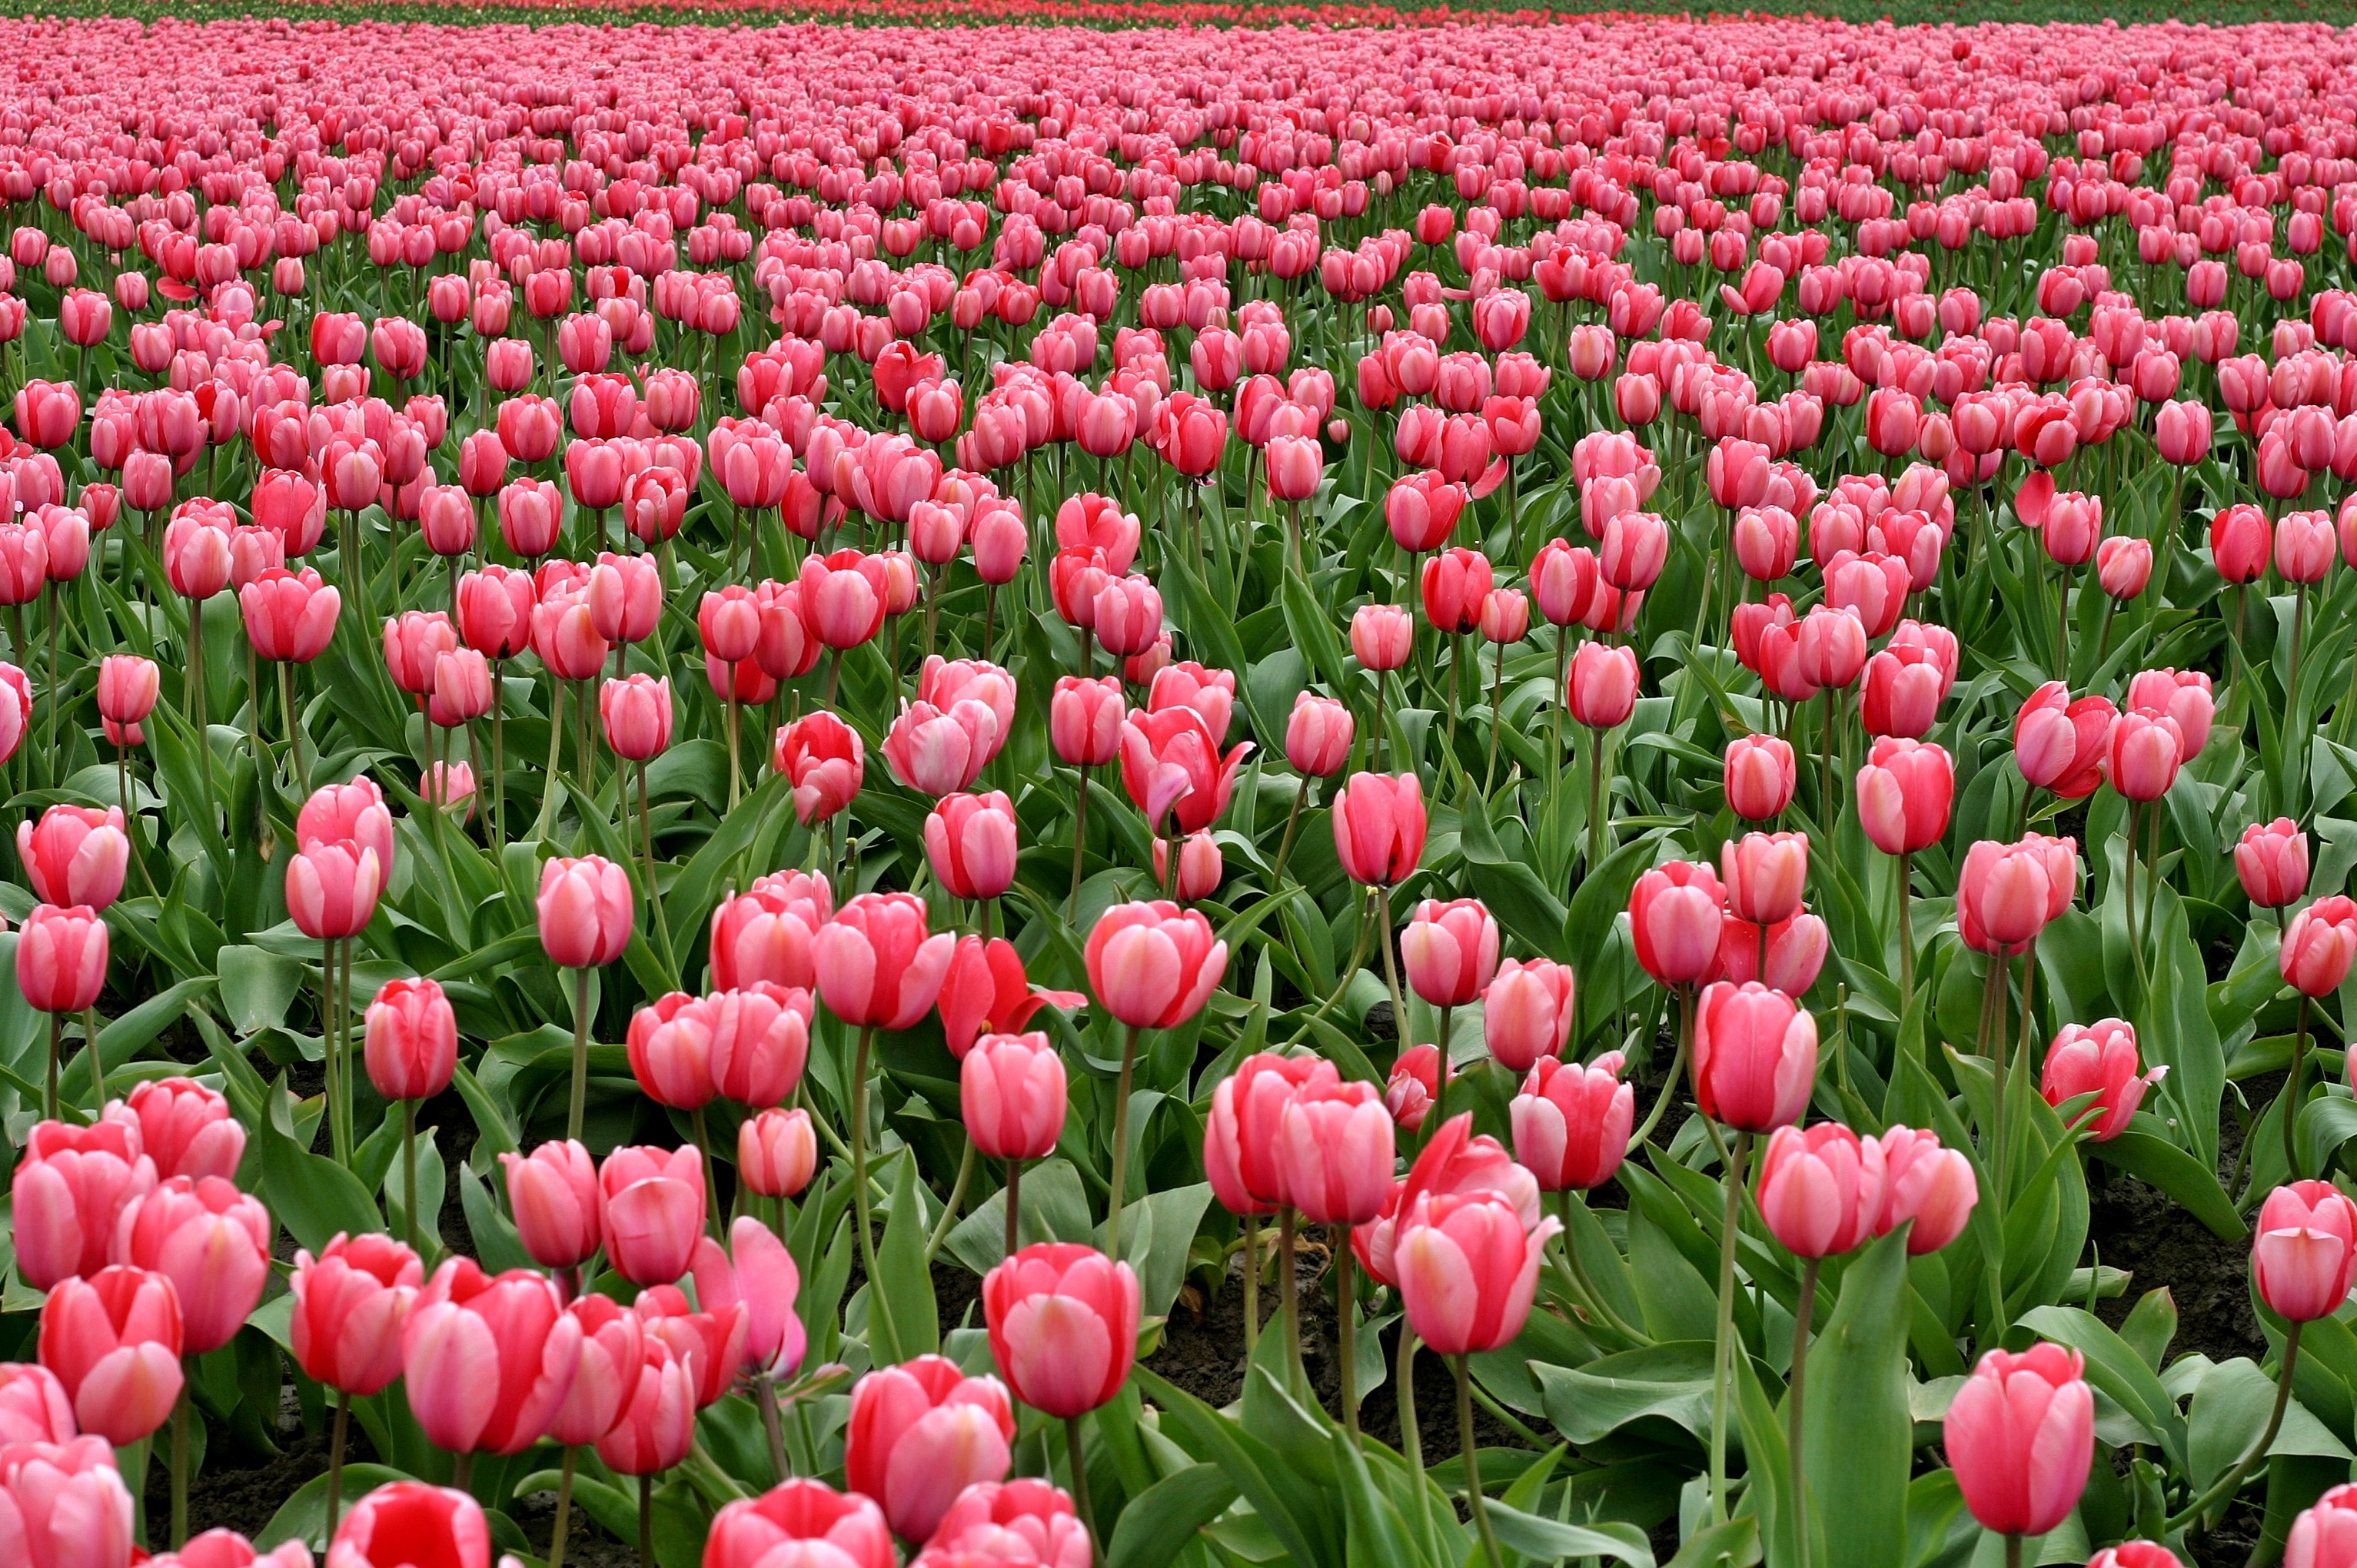 A large field of pink tulips.